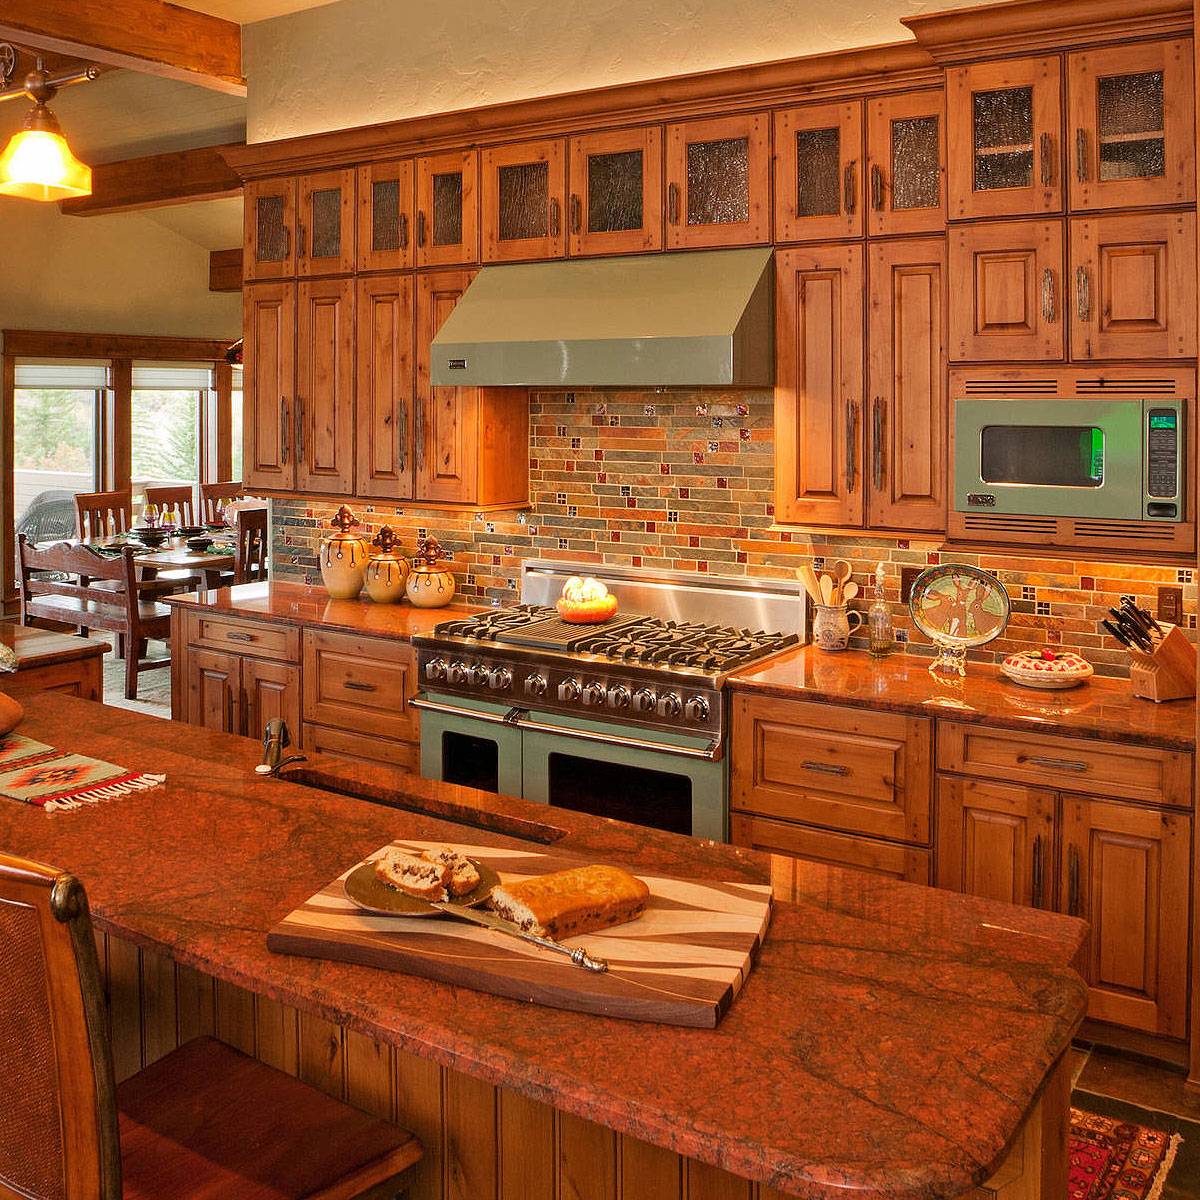 Kitchen interior in brown hues